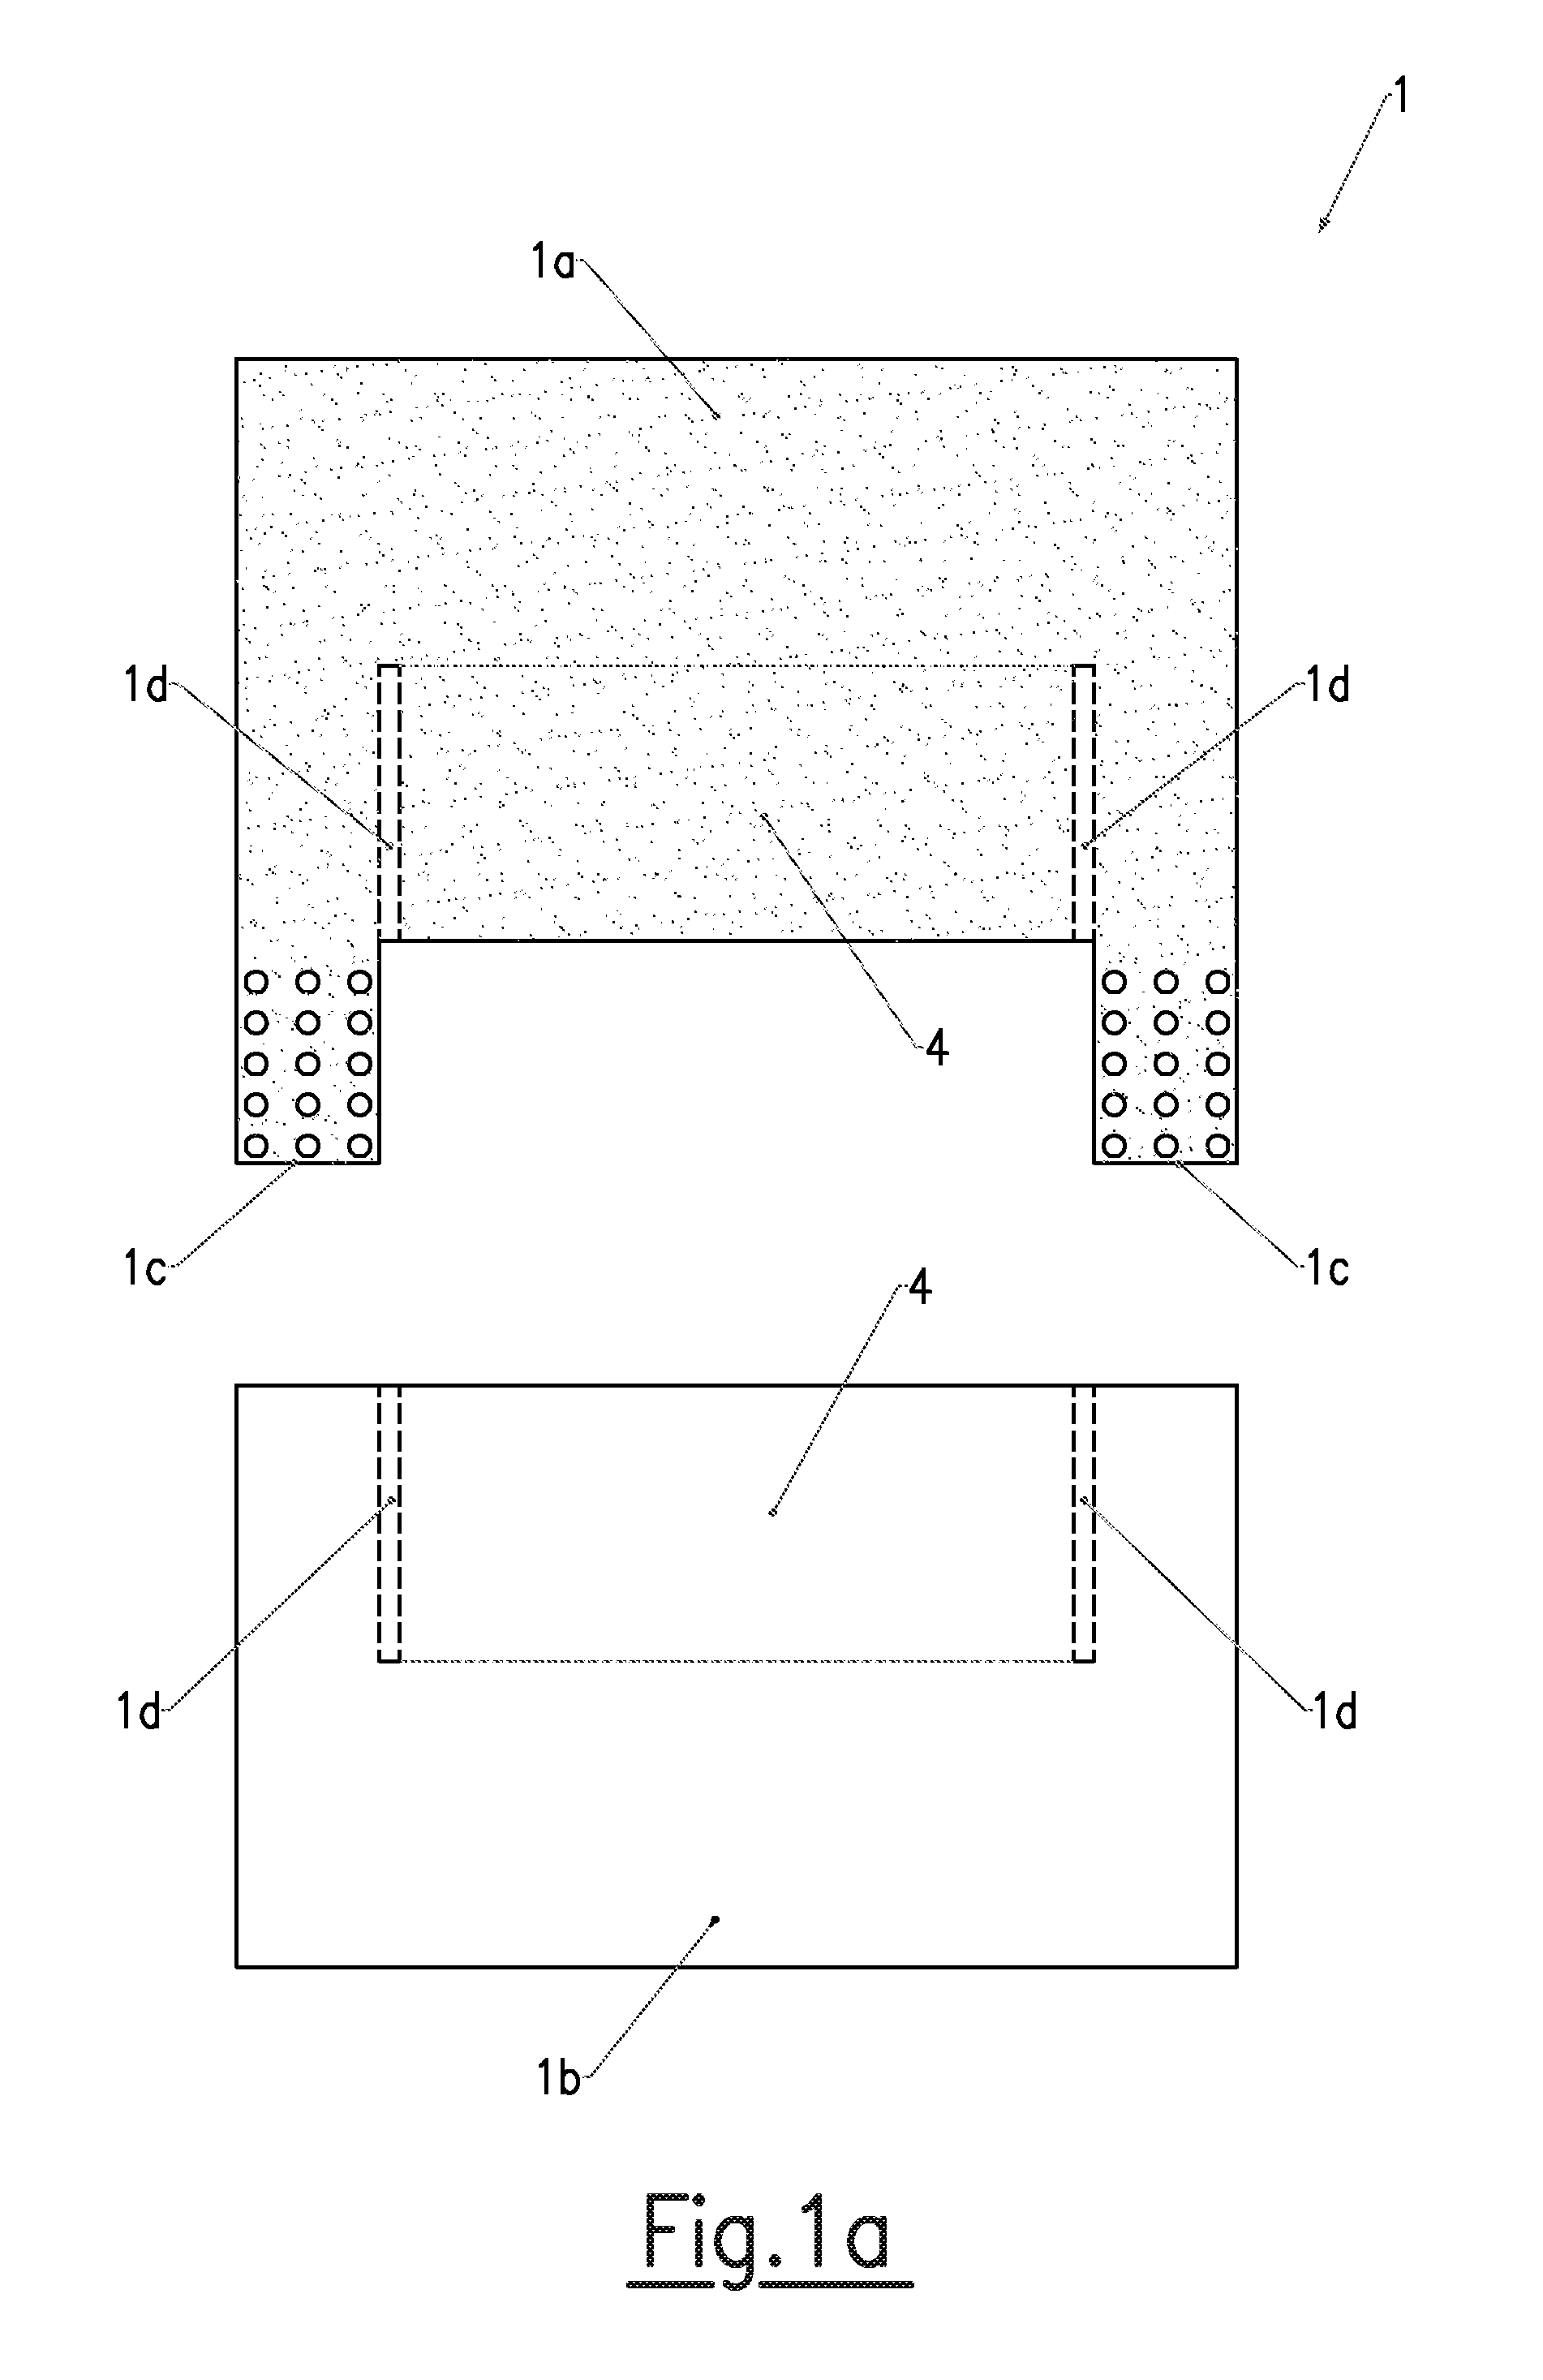 Antibacterial agent, and device used for active protection of incision margins and incorporating such an antibacterial agent